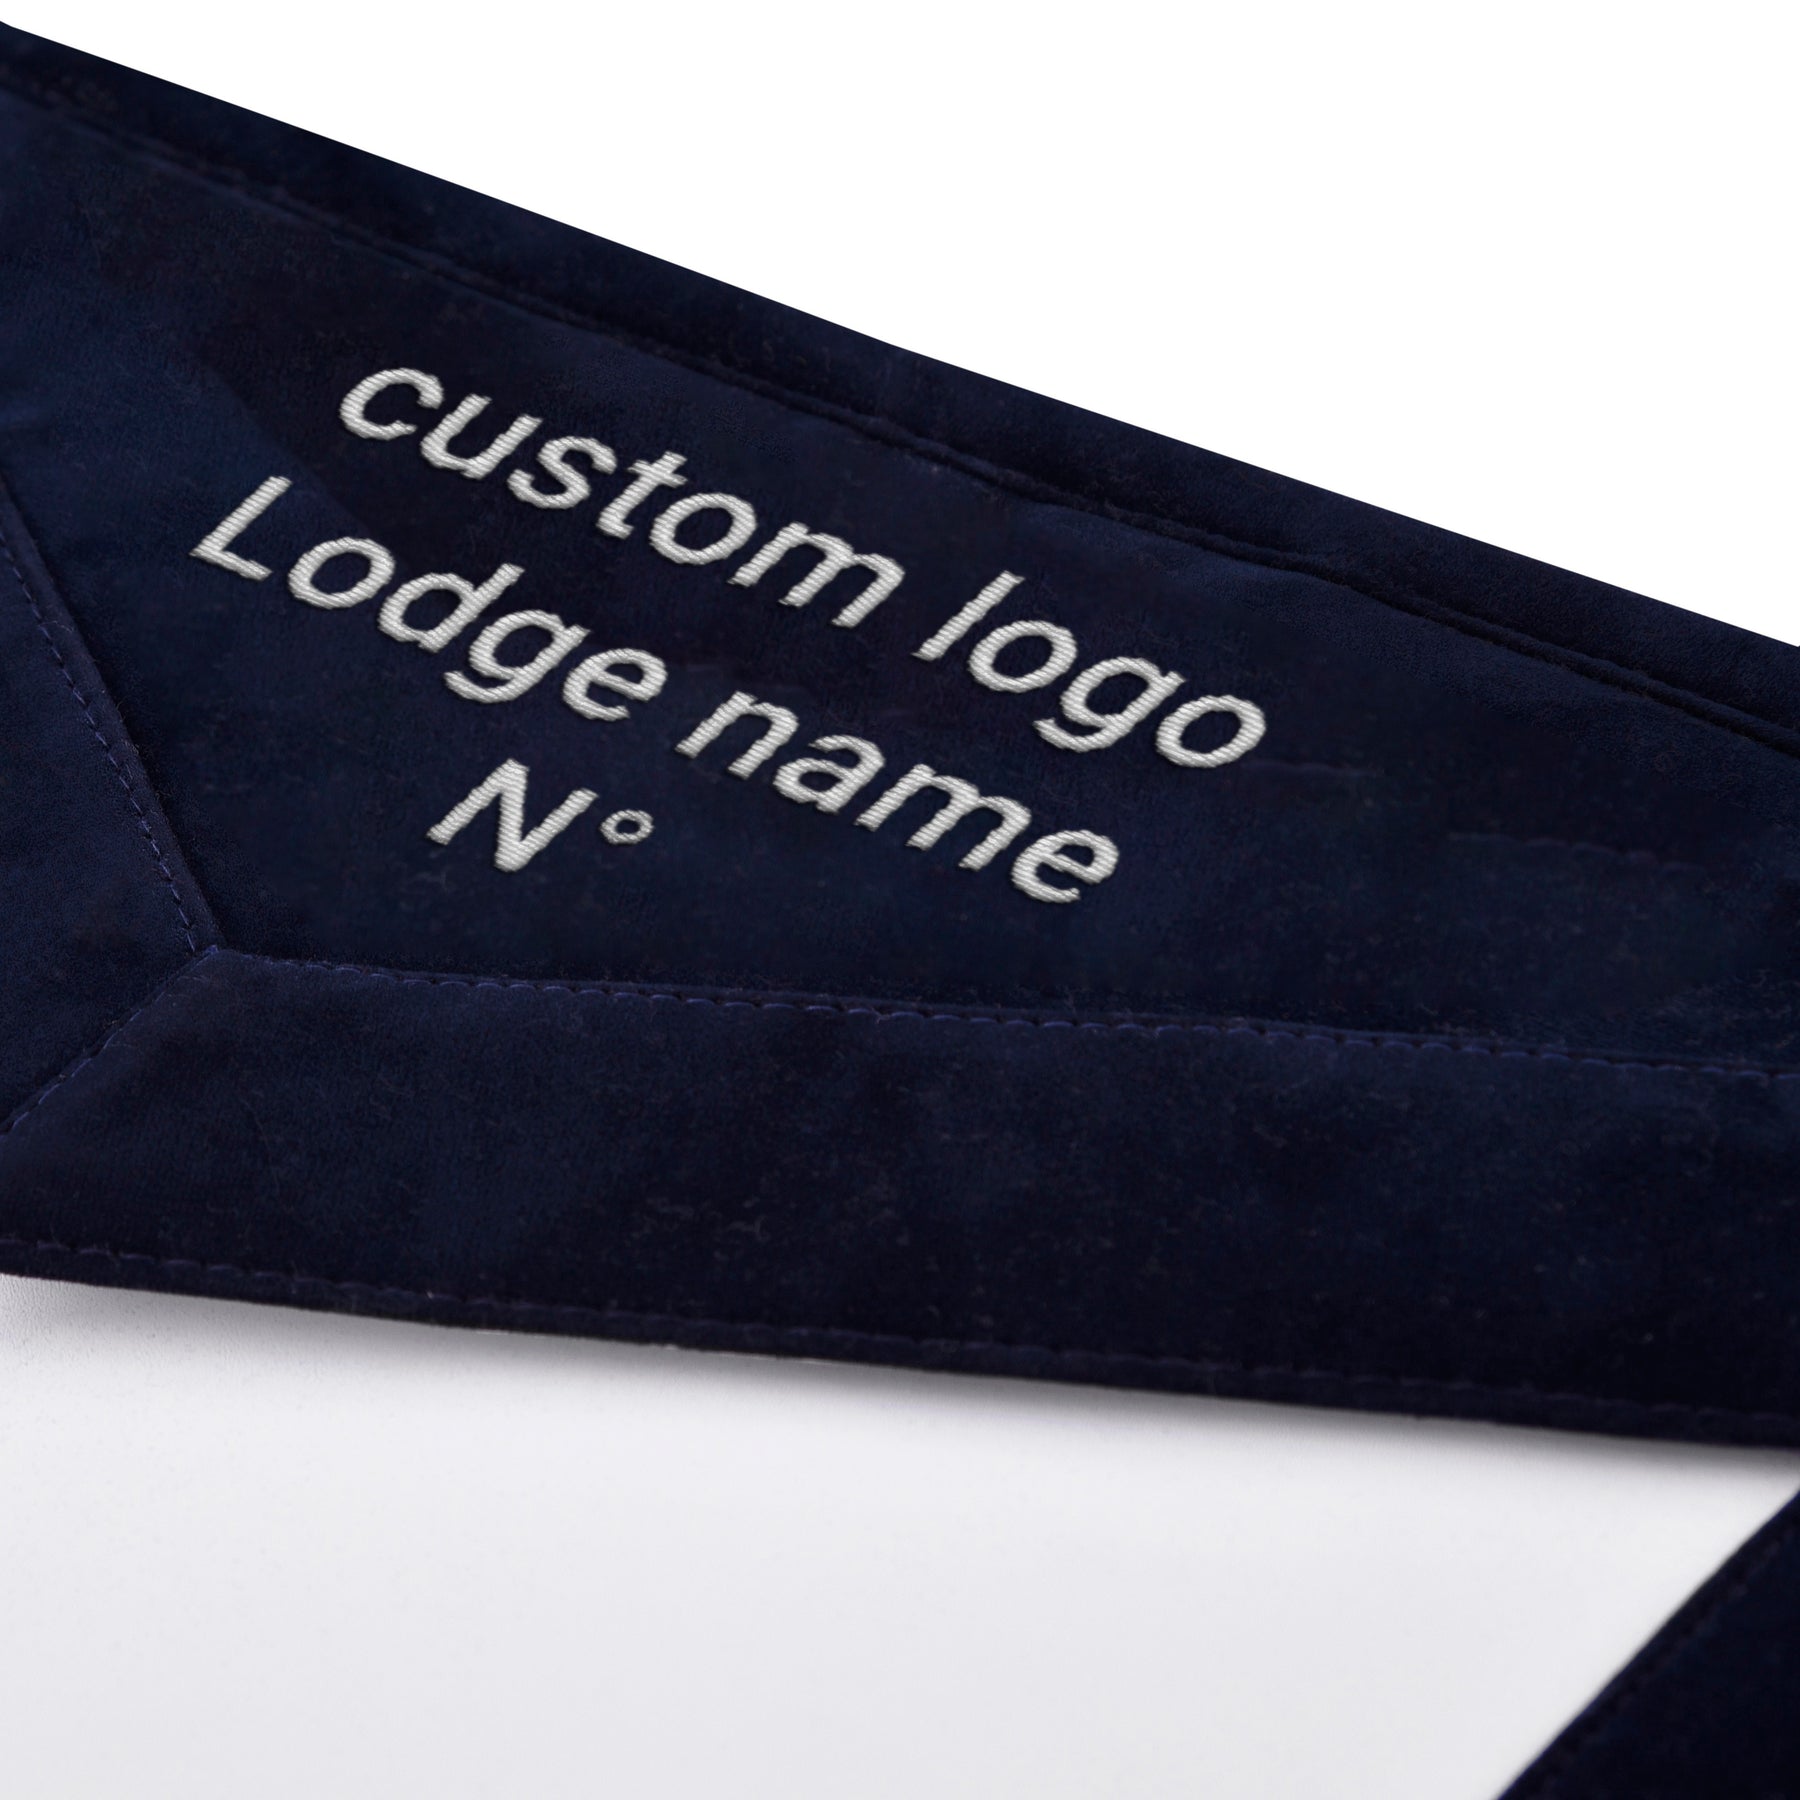 Junior Steward Blue Lodge Officer Apron - Navy Velvet With Silver Embroidery Thread